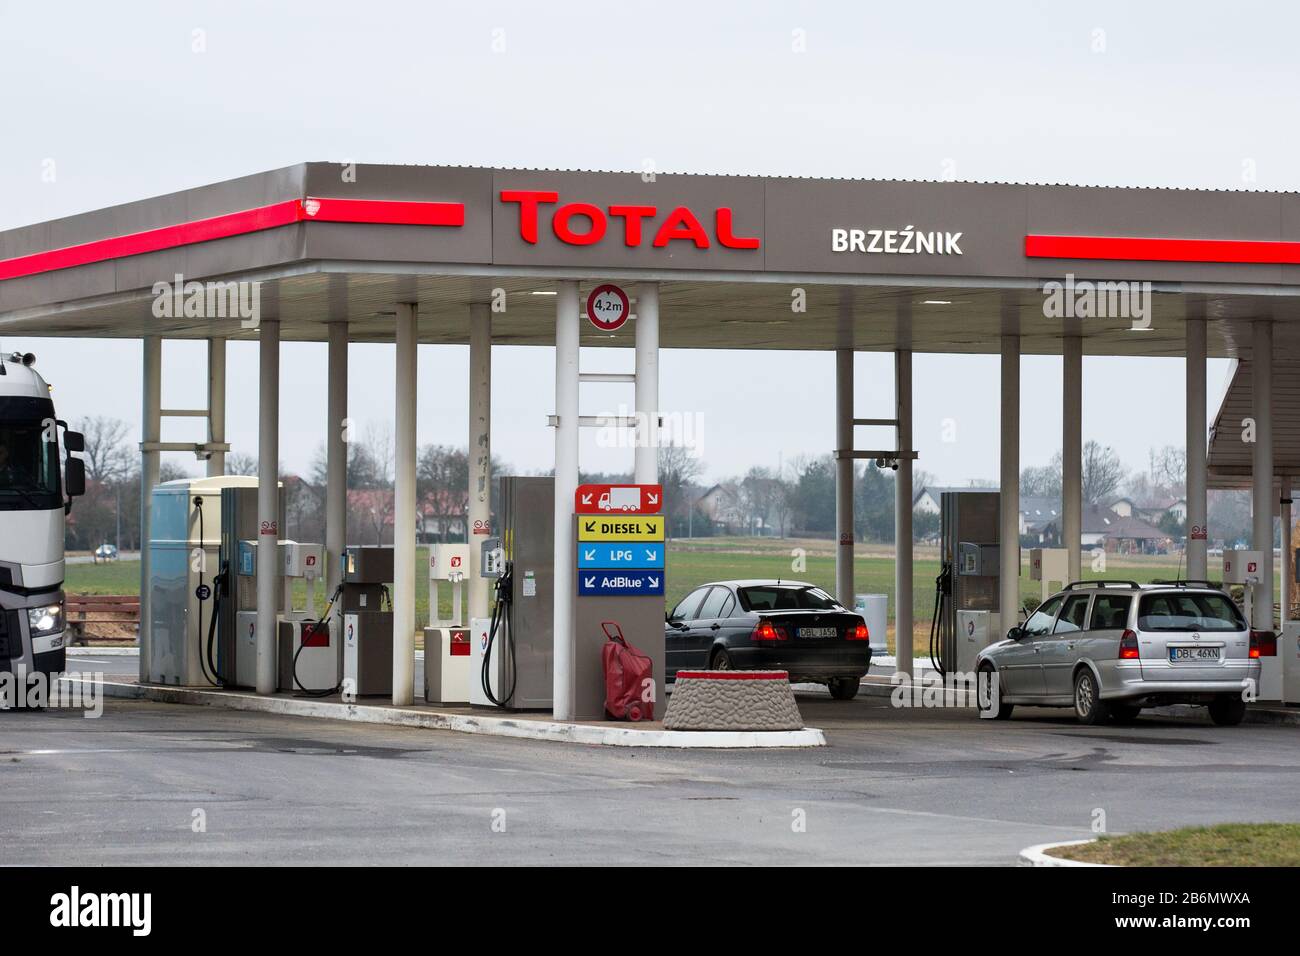 A general view of the Total petrol station. Stock Photo